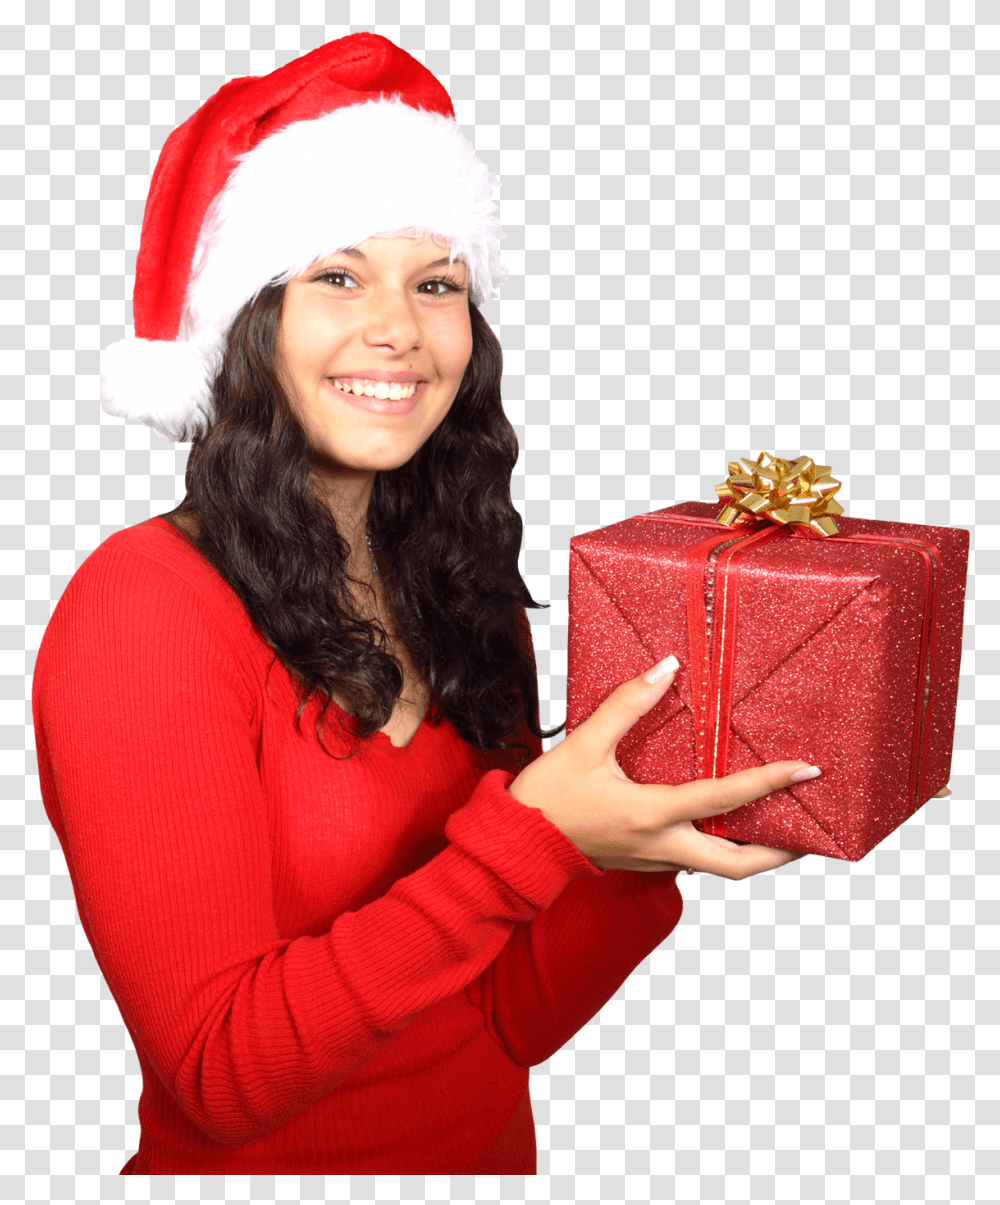 Woman In Santa Claus Clothes With Gift Image Pngpix Happy Christmas Day 2019, Person, Human Transparent Png